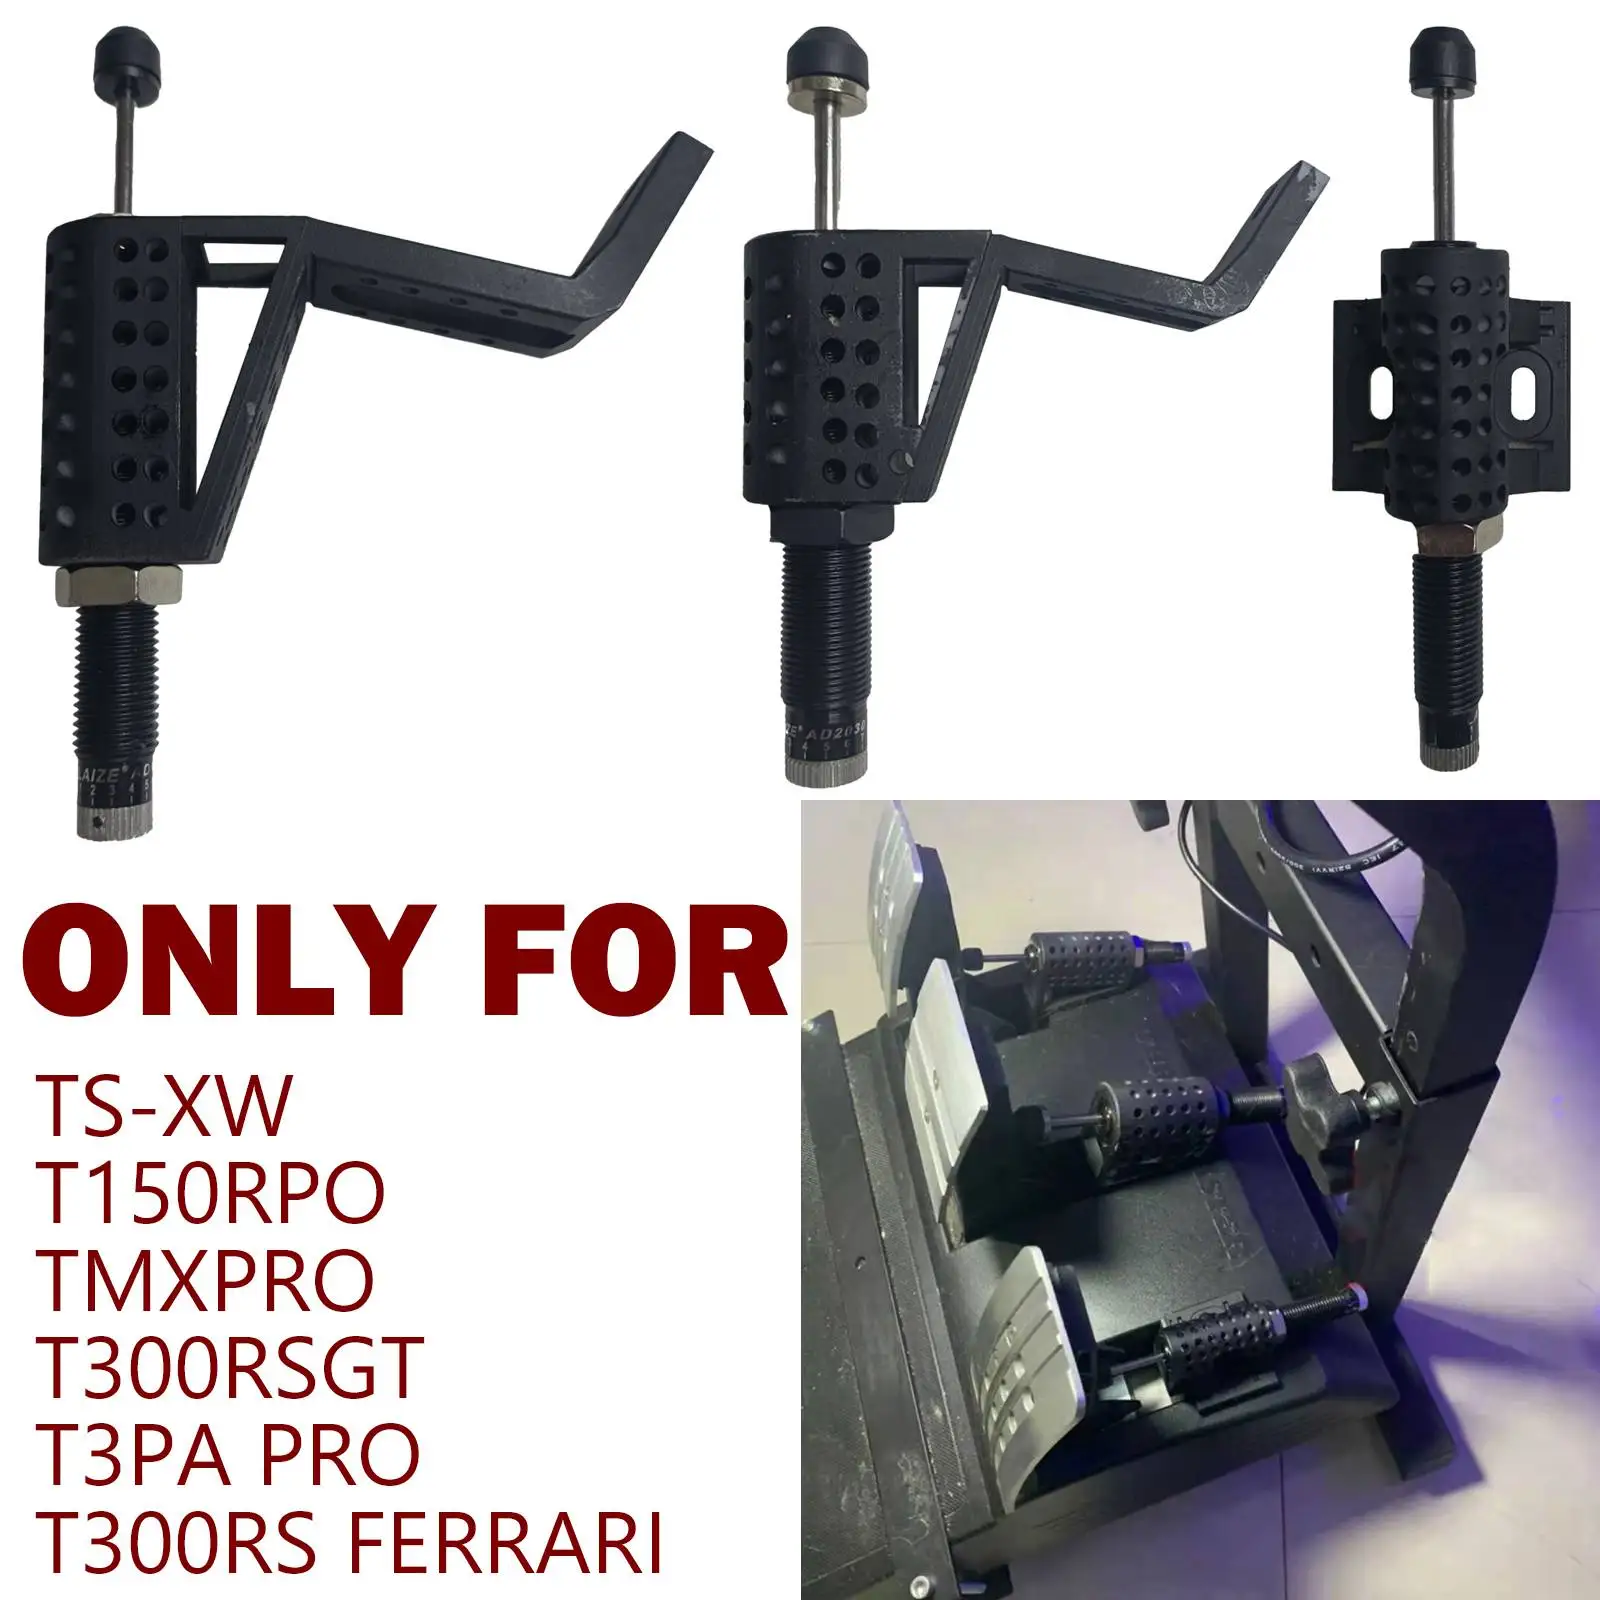 

Racing Game Pedal For T3pa T3p Pro TMX Pro Hydraulic Damper Thrustmaster T300gt F 150pro Throttle/Clutch/Brake Hydraulic Damper